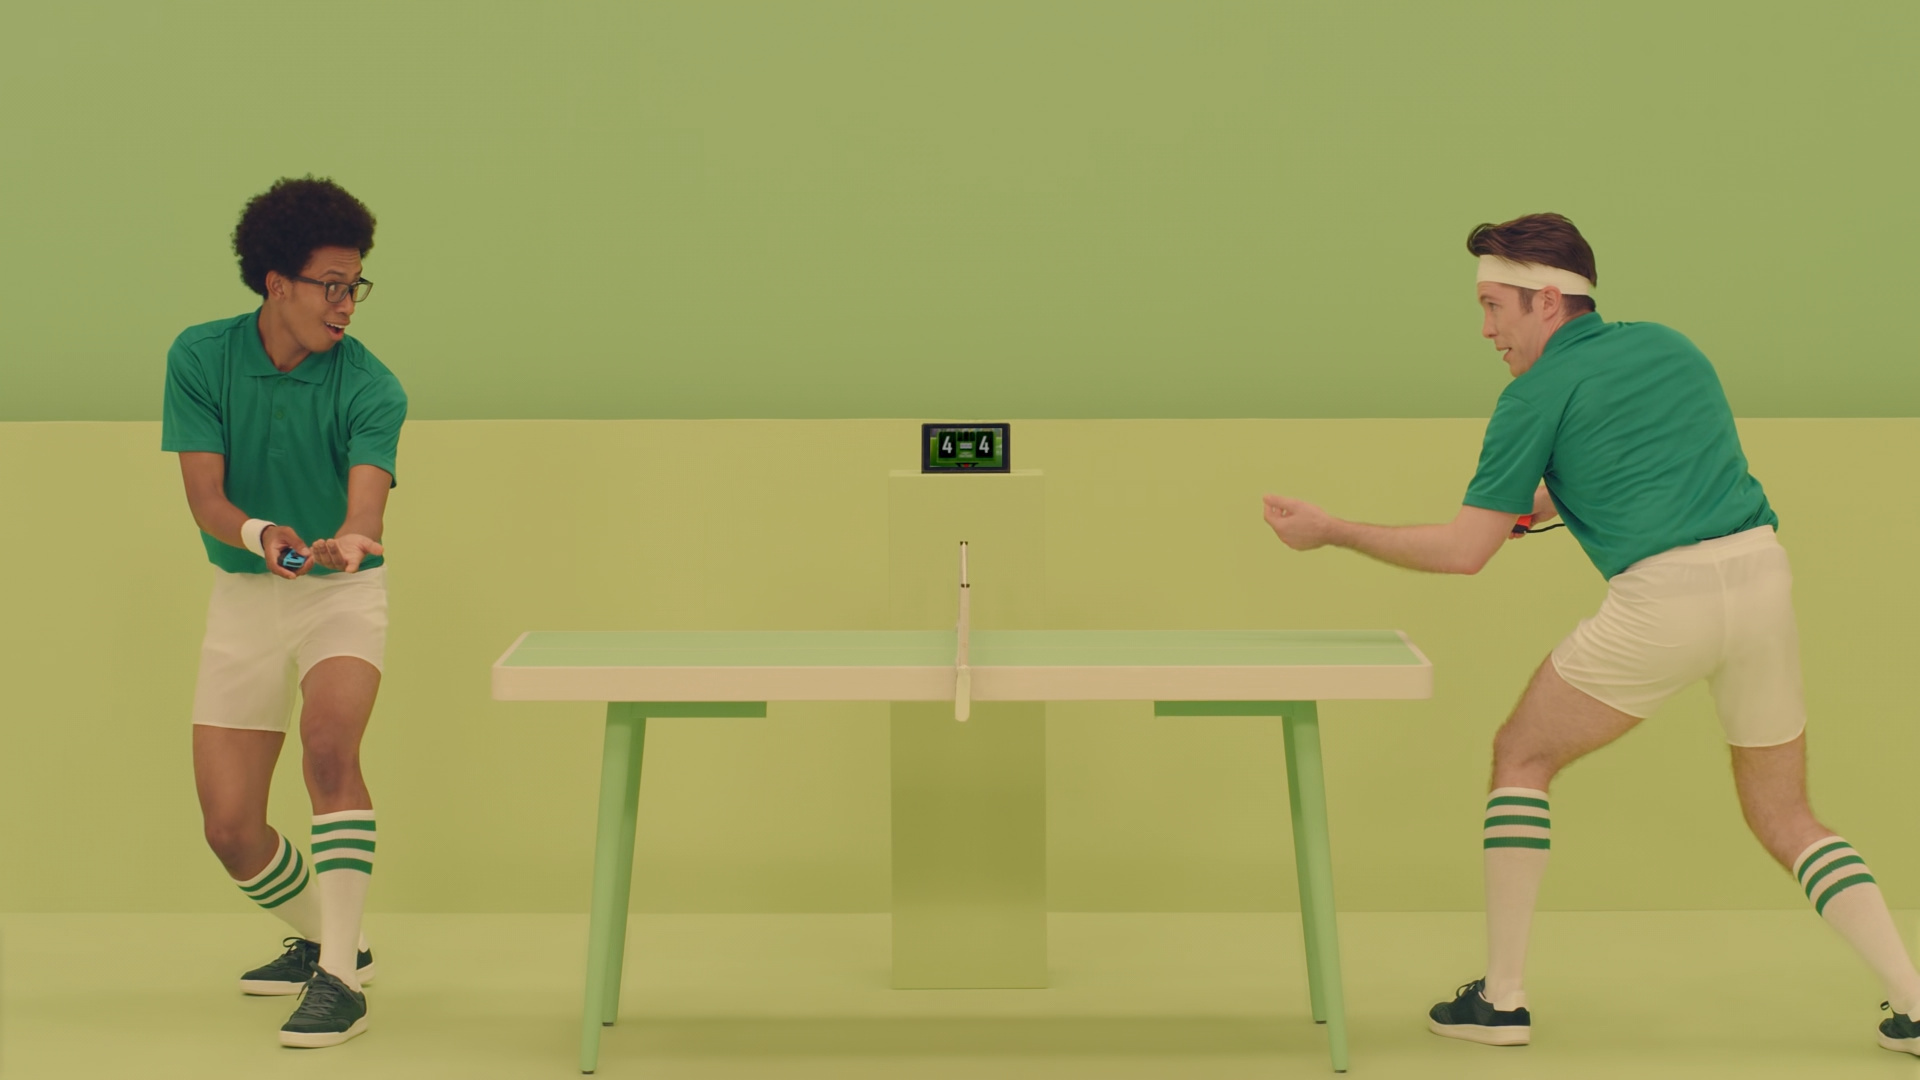 Table Tennis: Augmented reality ping-pong game, Ping-pong for Switch platform. 1920x1080 Full HD Wallpaper.